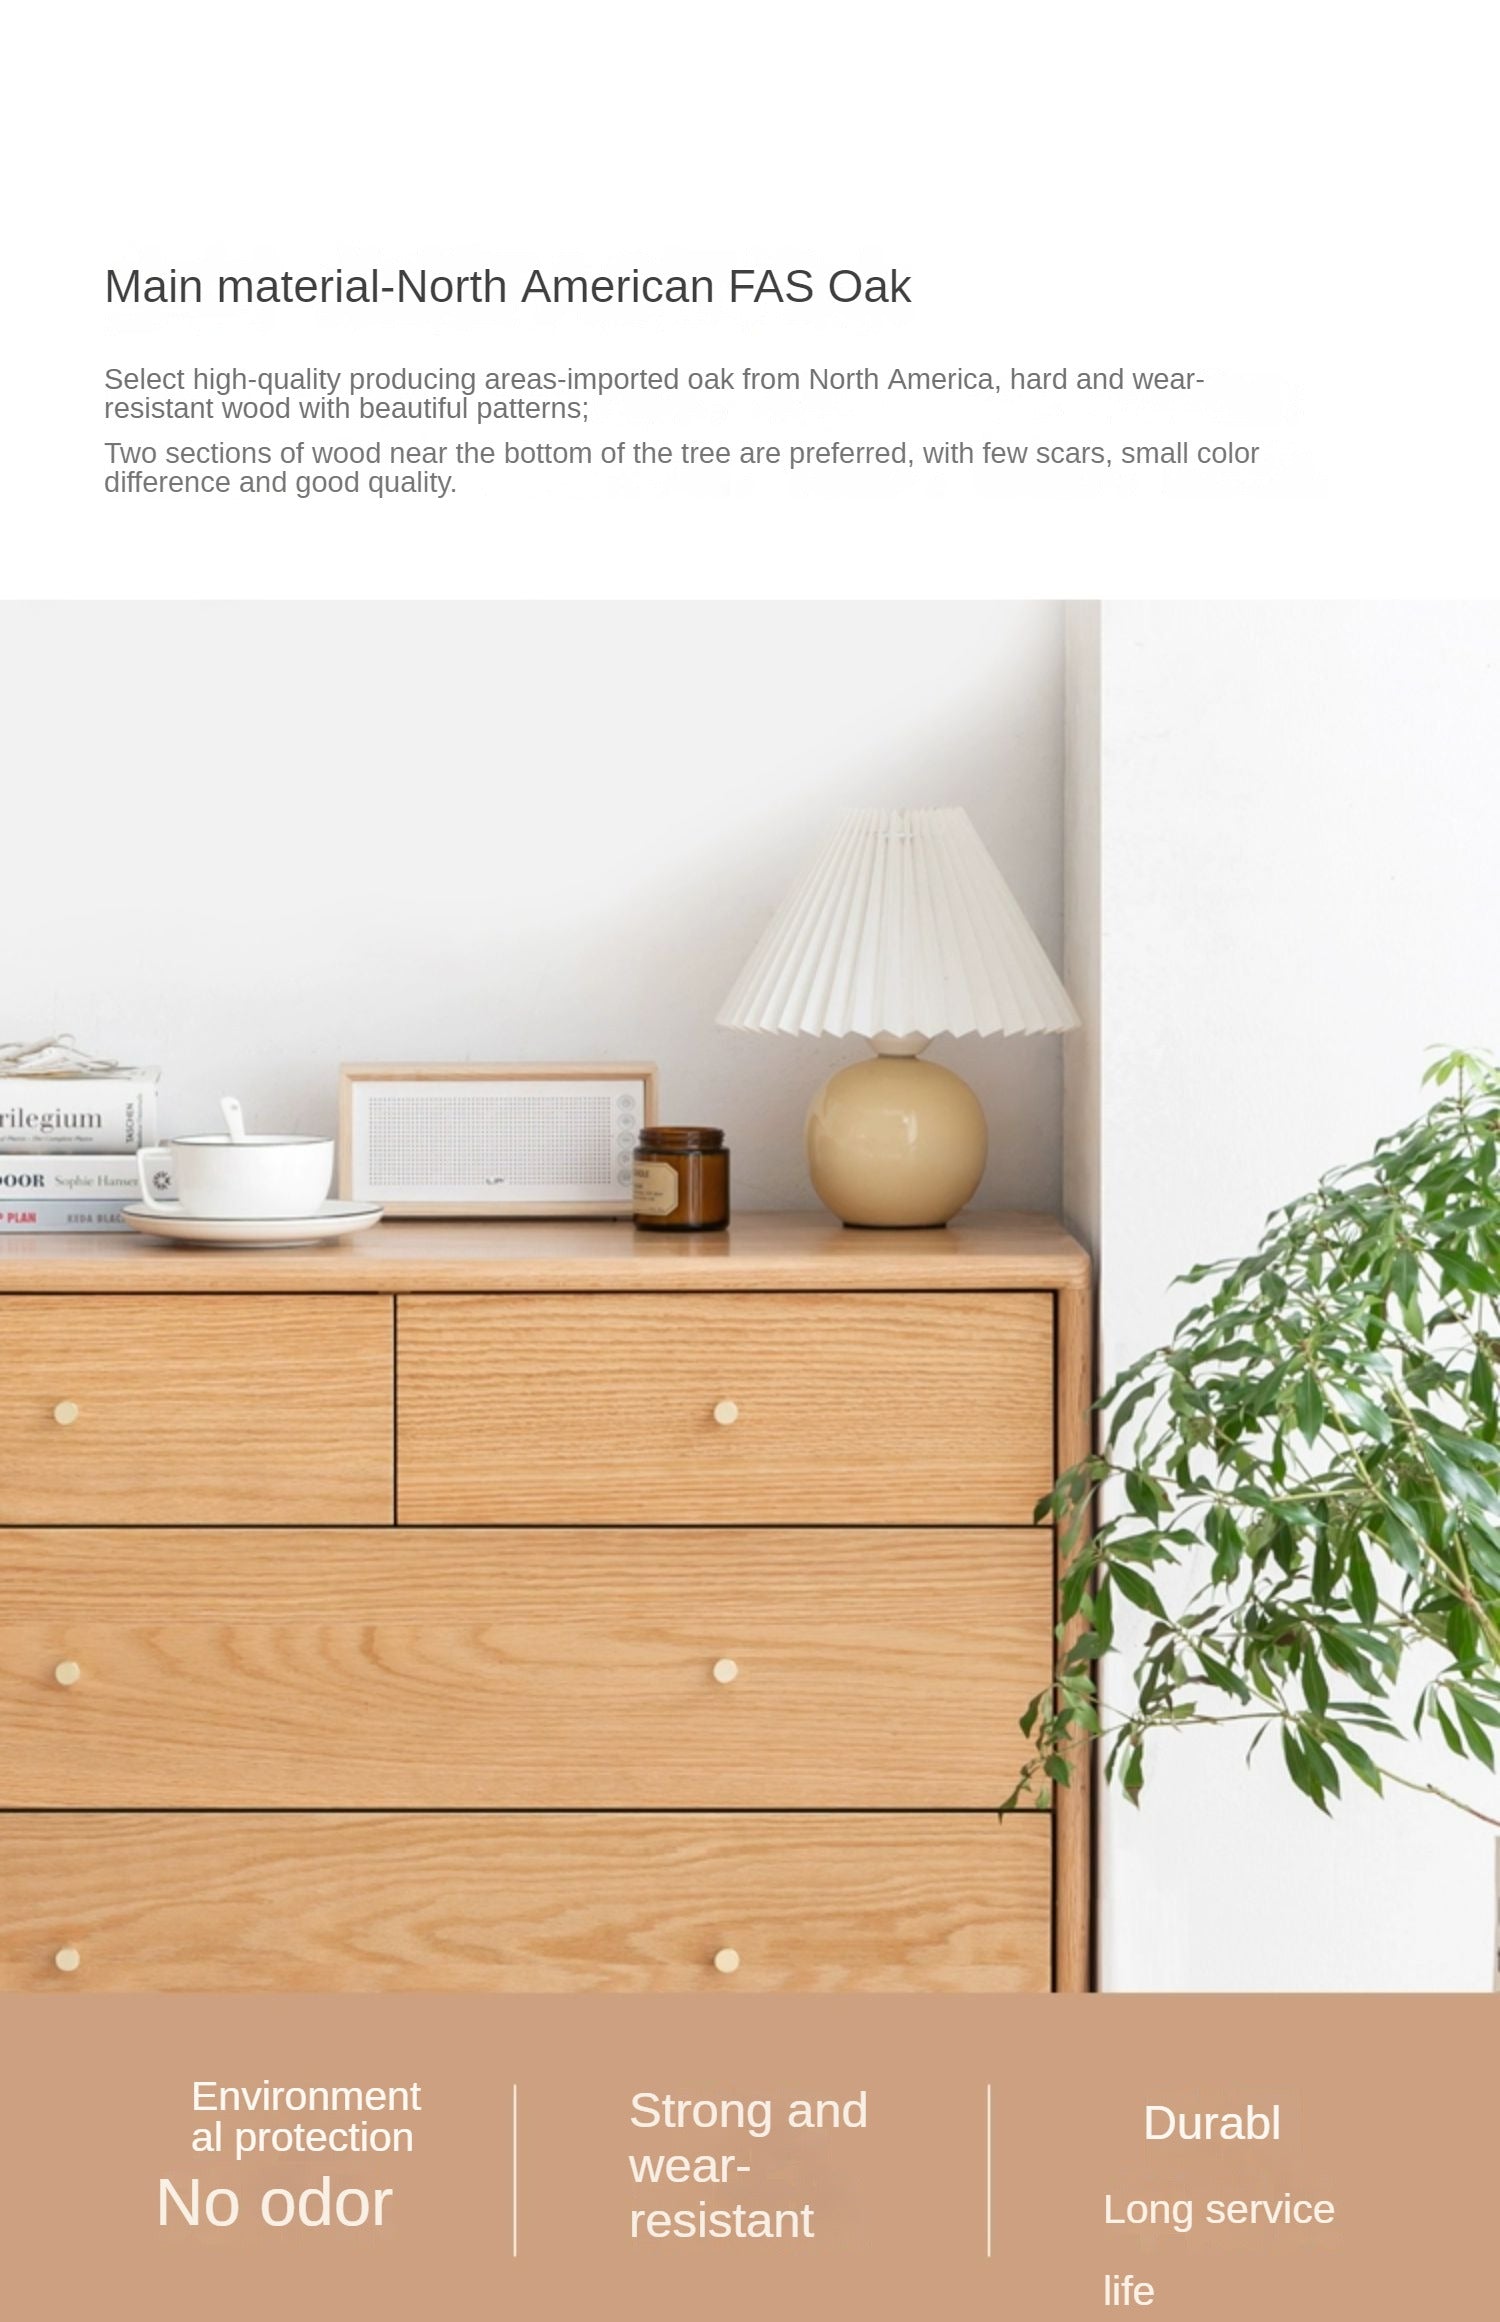 Oak solid wood chest of drawers Nordic)